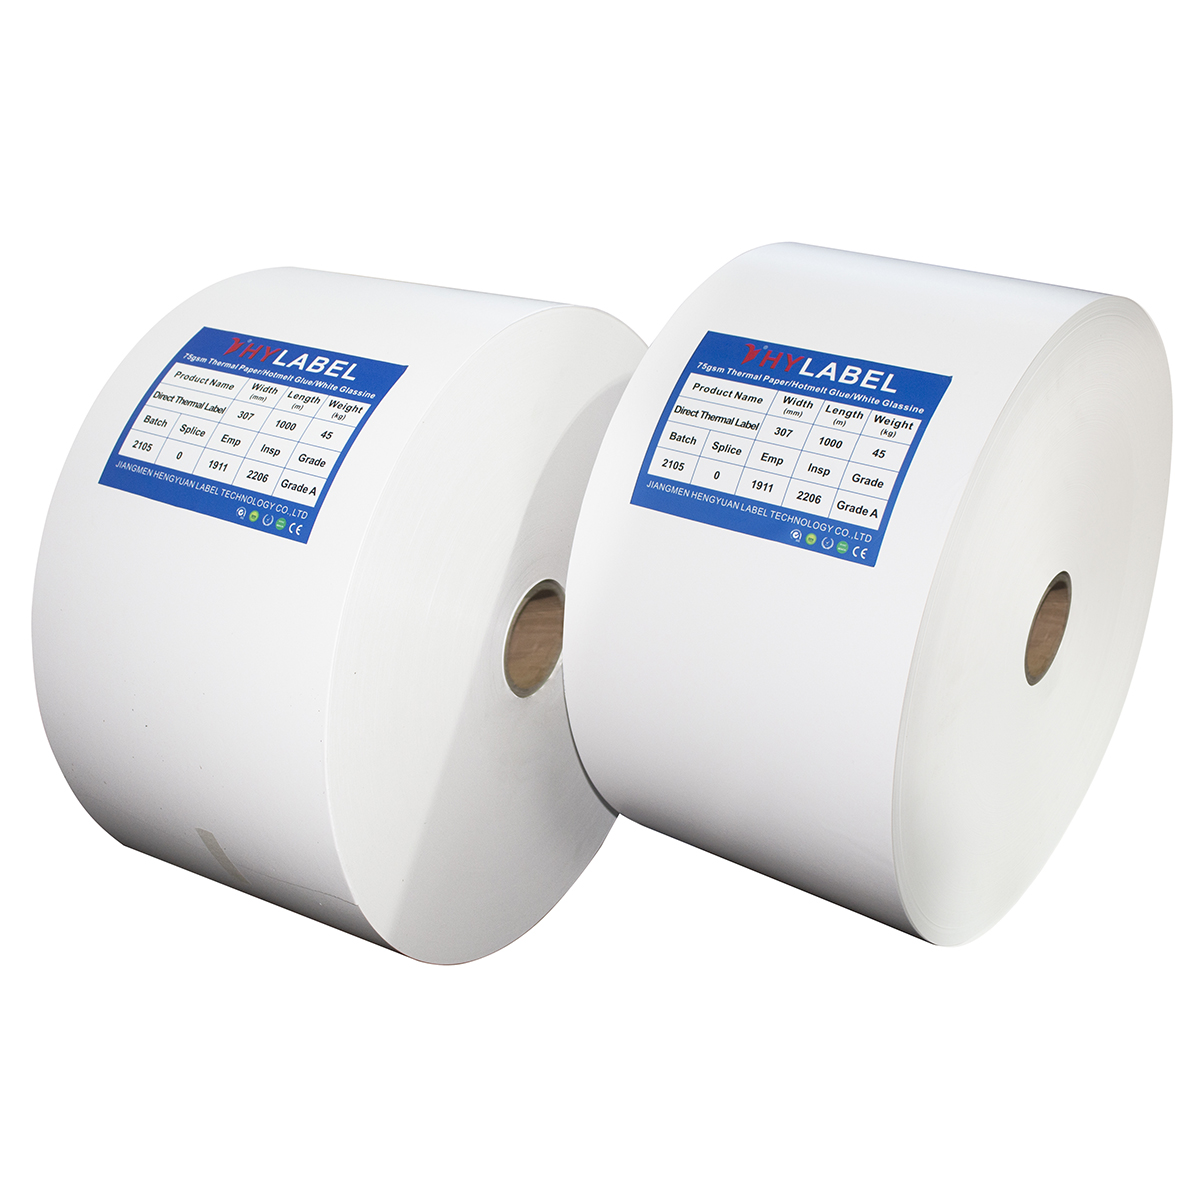 Thermal Label Jumbo Roll Thermal Direct Roll Paper China Supplier Thermal Labels Manufacturer Jumbo Roll